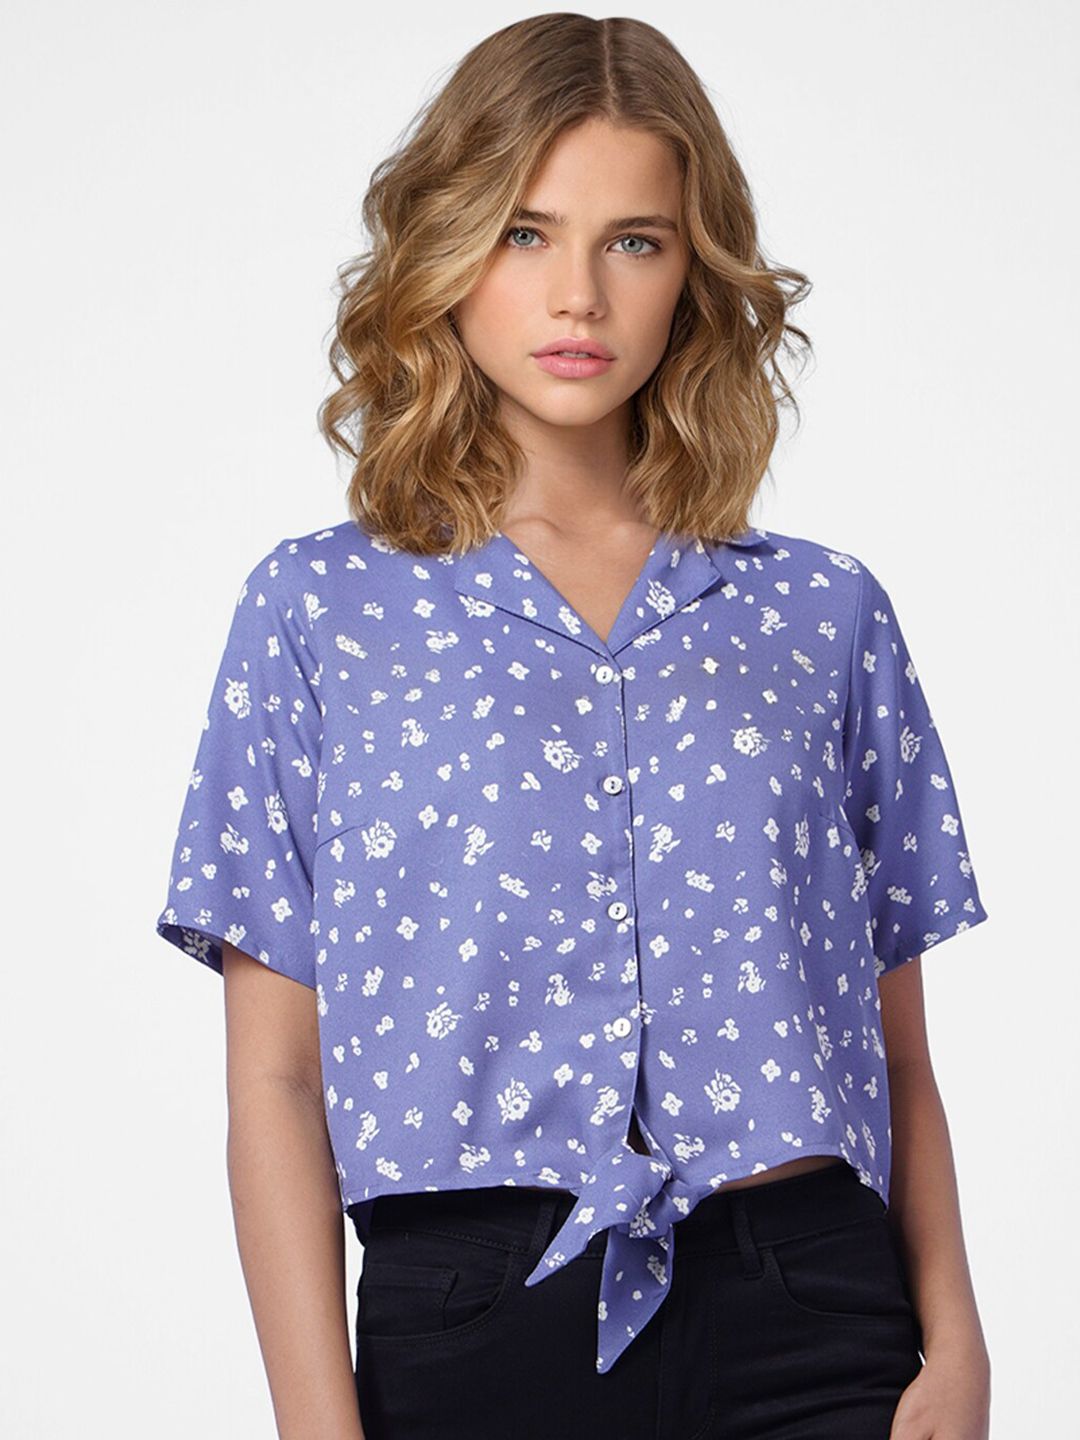 ONLY  Women Blue Floral Print Top Price in India